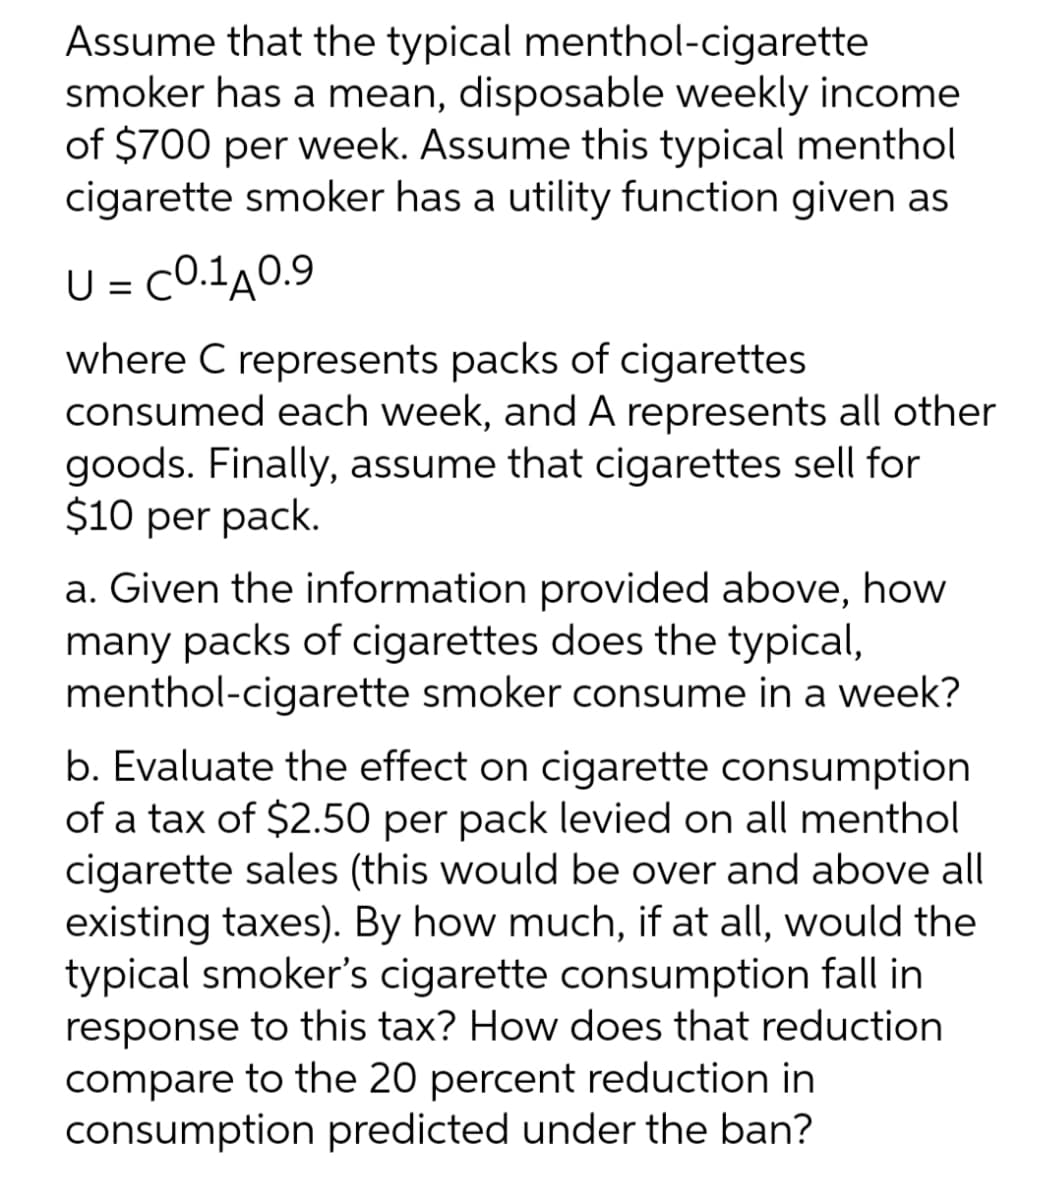 Assume that the typical menthol-cigarette
smoker has a mean, disposable weekly income
of $700 per week. Assume this typical menthol
cigarette smoker has a utility function given as
U = C0.1A0.9
where C represents packs of cigarettes
consumed each week, and A represents all other
goods. Finally, assume that cigarettes sell for
$10 per pack.
a. Given the information provided above, how
many packs of cigarettes does the typical,
menthol-cigarette smoker consume in a week?
b. Evaluate the effect on cigarette consumption
of a tax of $2.50 per pack levied on all menthol
cigarette sales (this would be over and above all
existing taxes). By how much, if at all, would the
typical smoker's cigarette consumption fall in
response to this tax? How does that reduction
compare to the 20 percent reduction in
consumption predicted under the ban?
